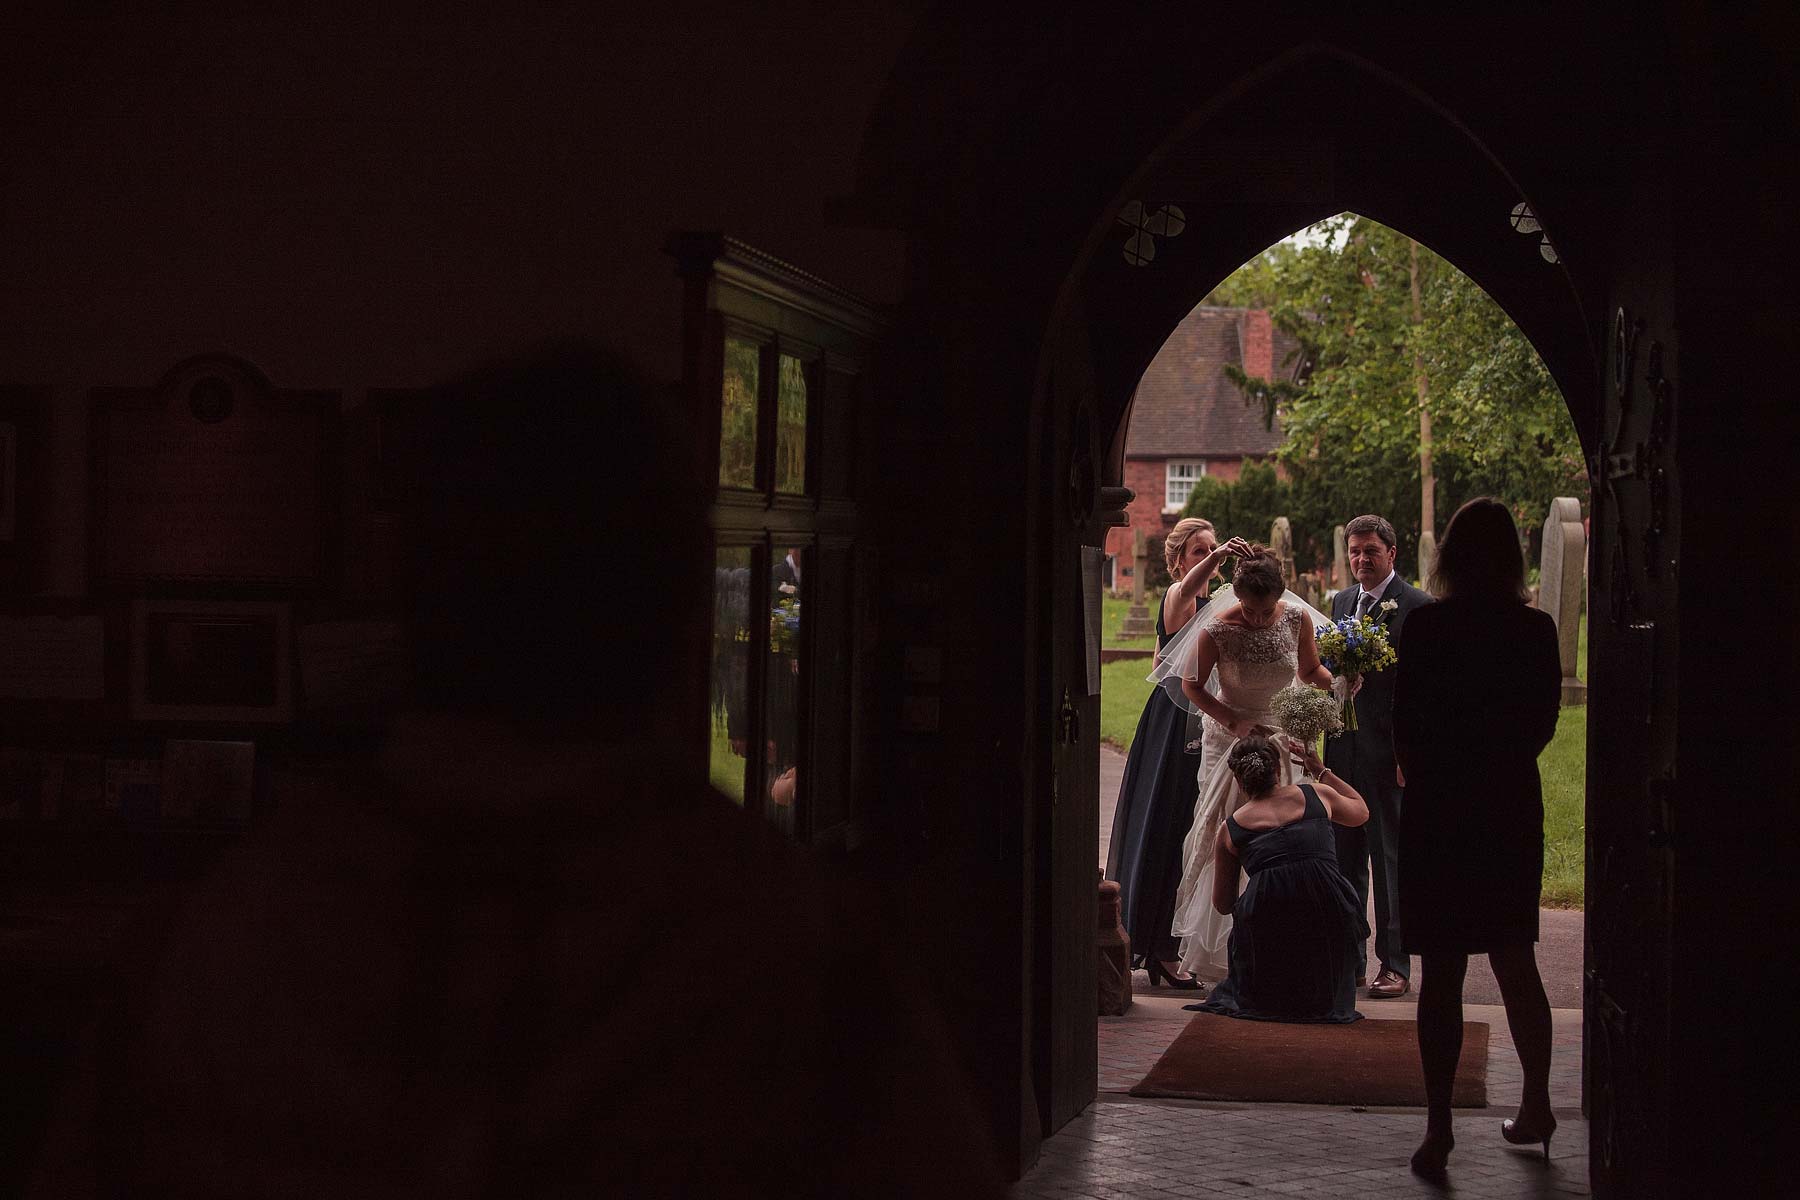 Finishing touches as the bride is attended by her bridesmaids in the doorway to St Chads Church in Pattingham by Pattingham Wedding Photographer Stuart James